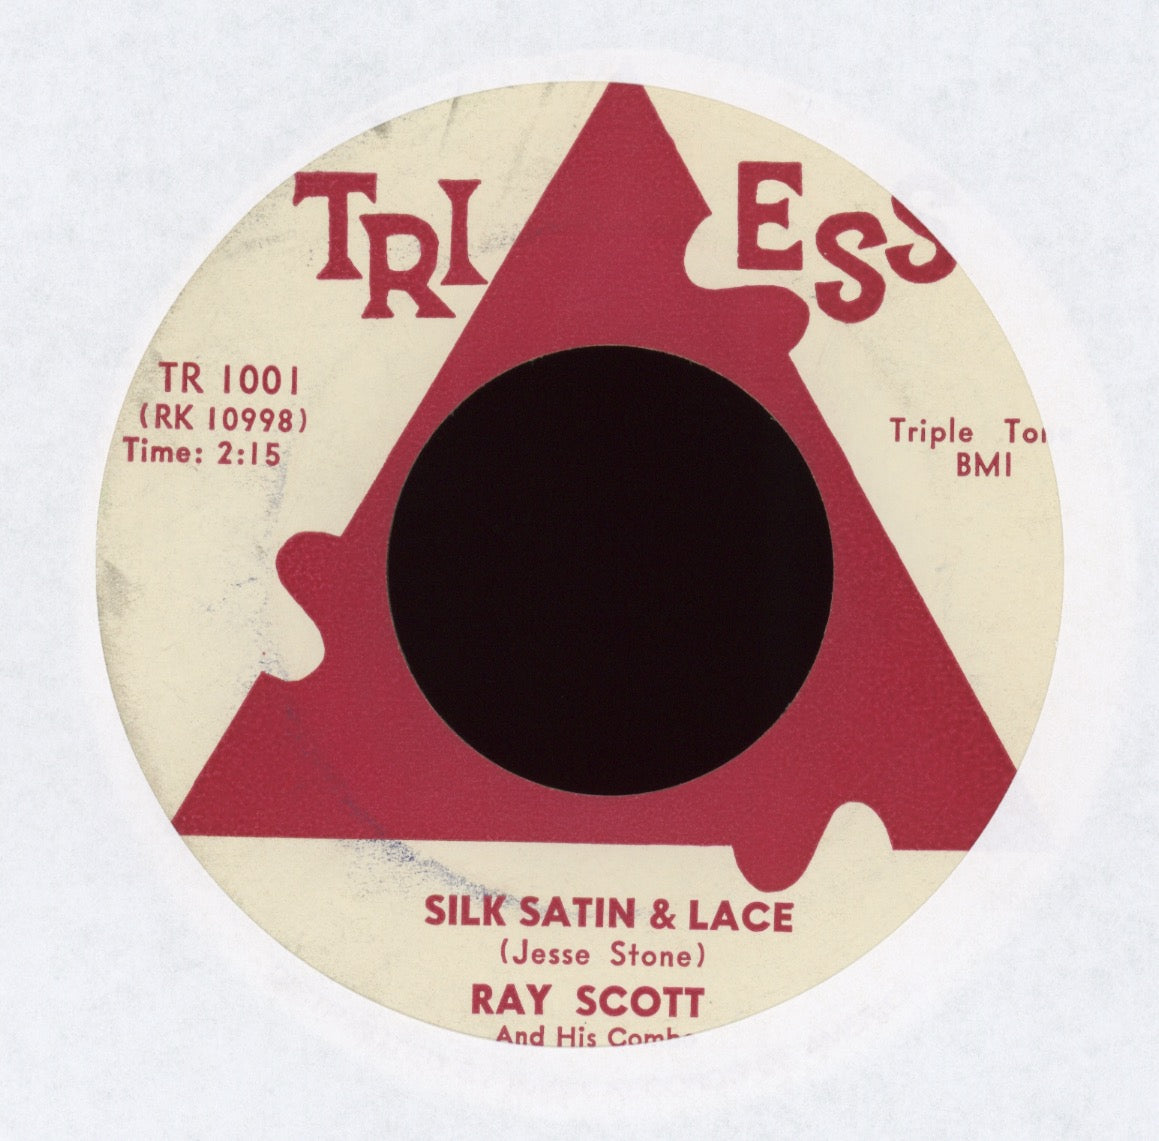 Ray Scott And His Combo - Silk Satin & Lace on Tri Ess